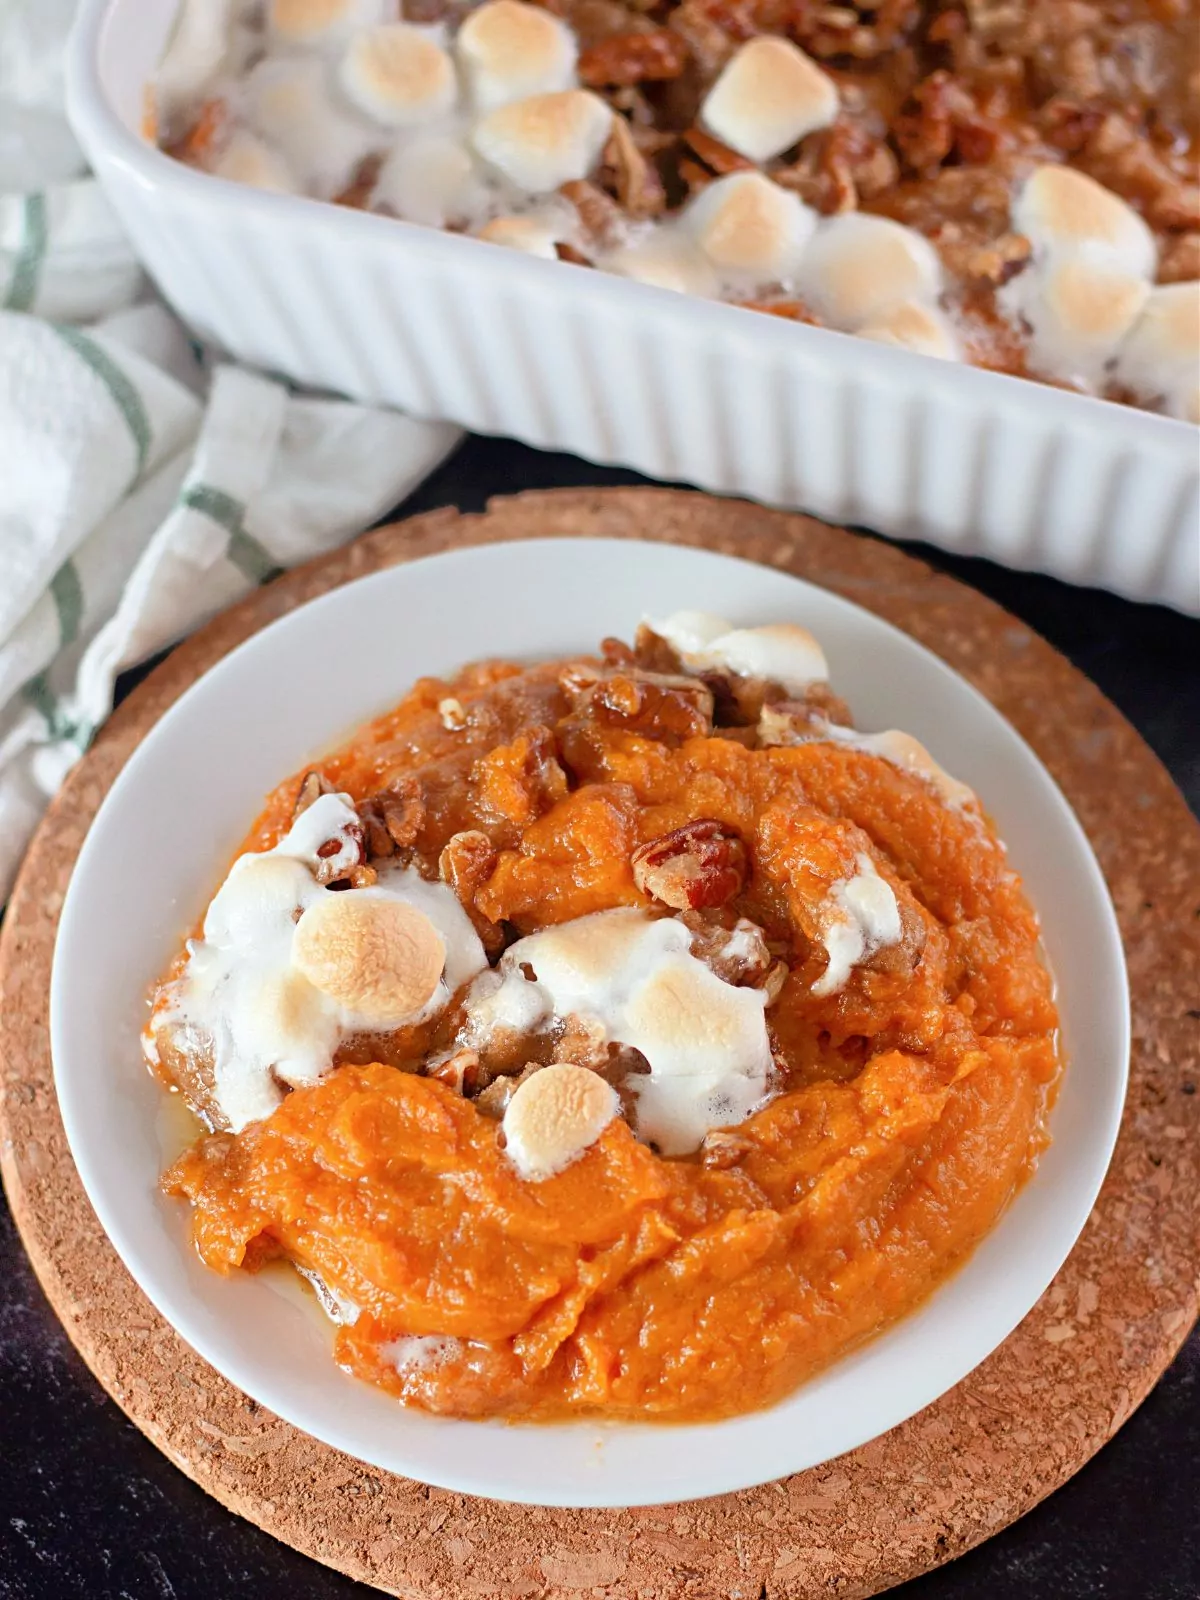 sweet potato casserole with marshmallows served on plate.